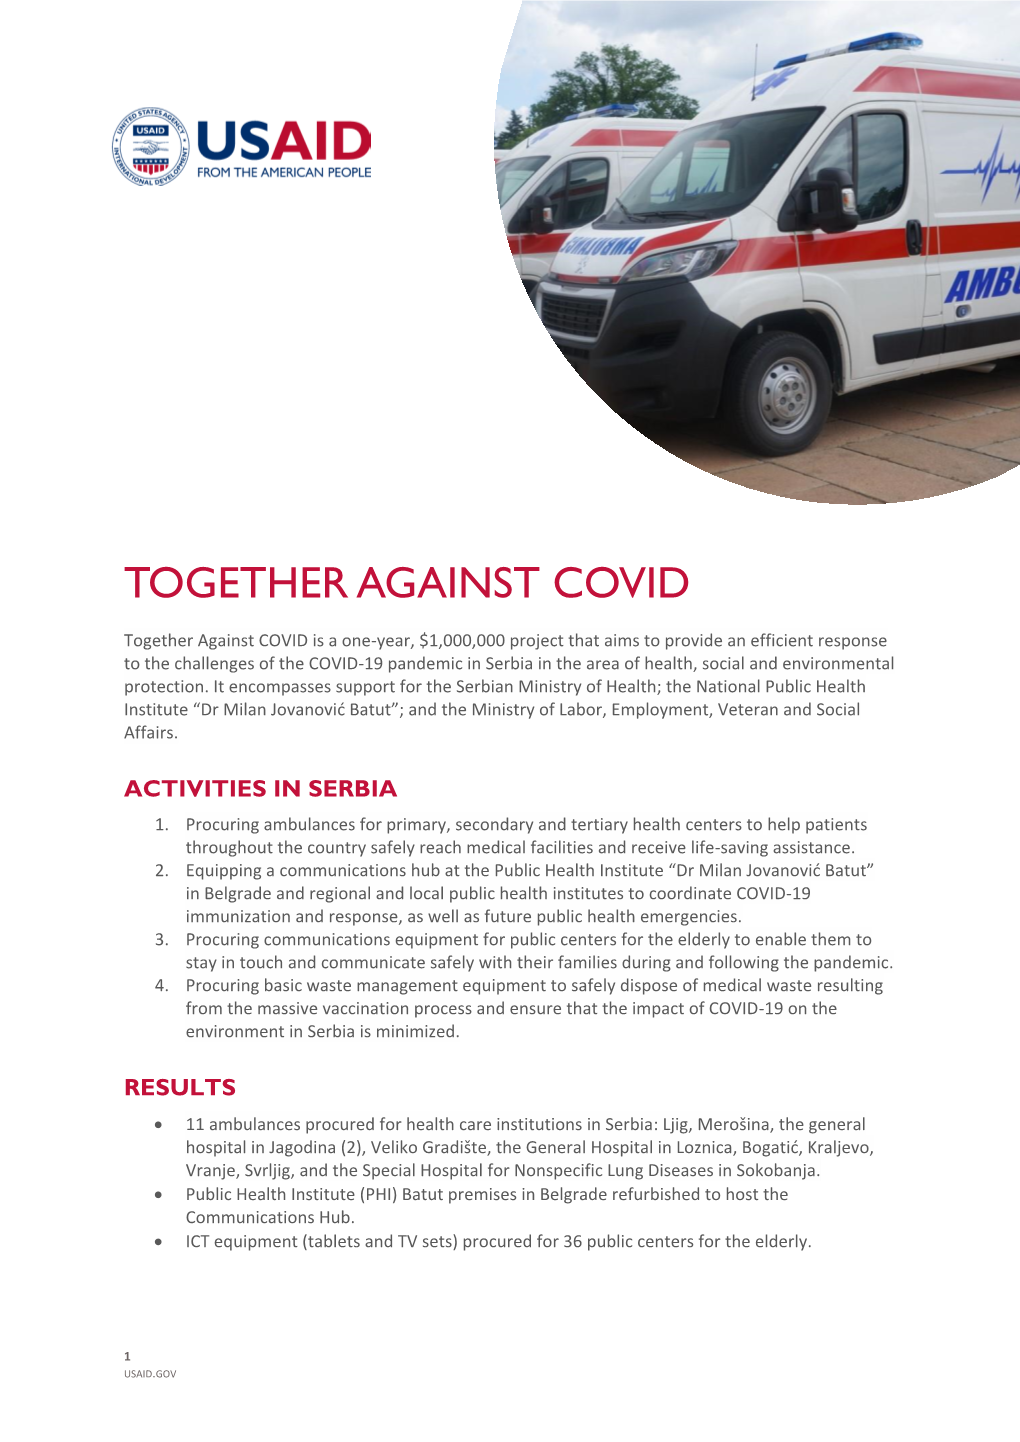 Together Against Covid